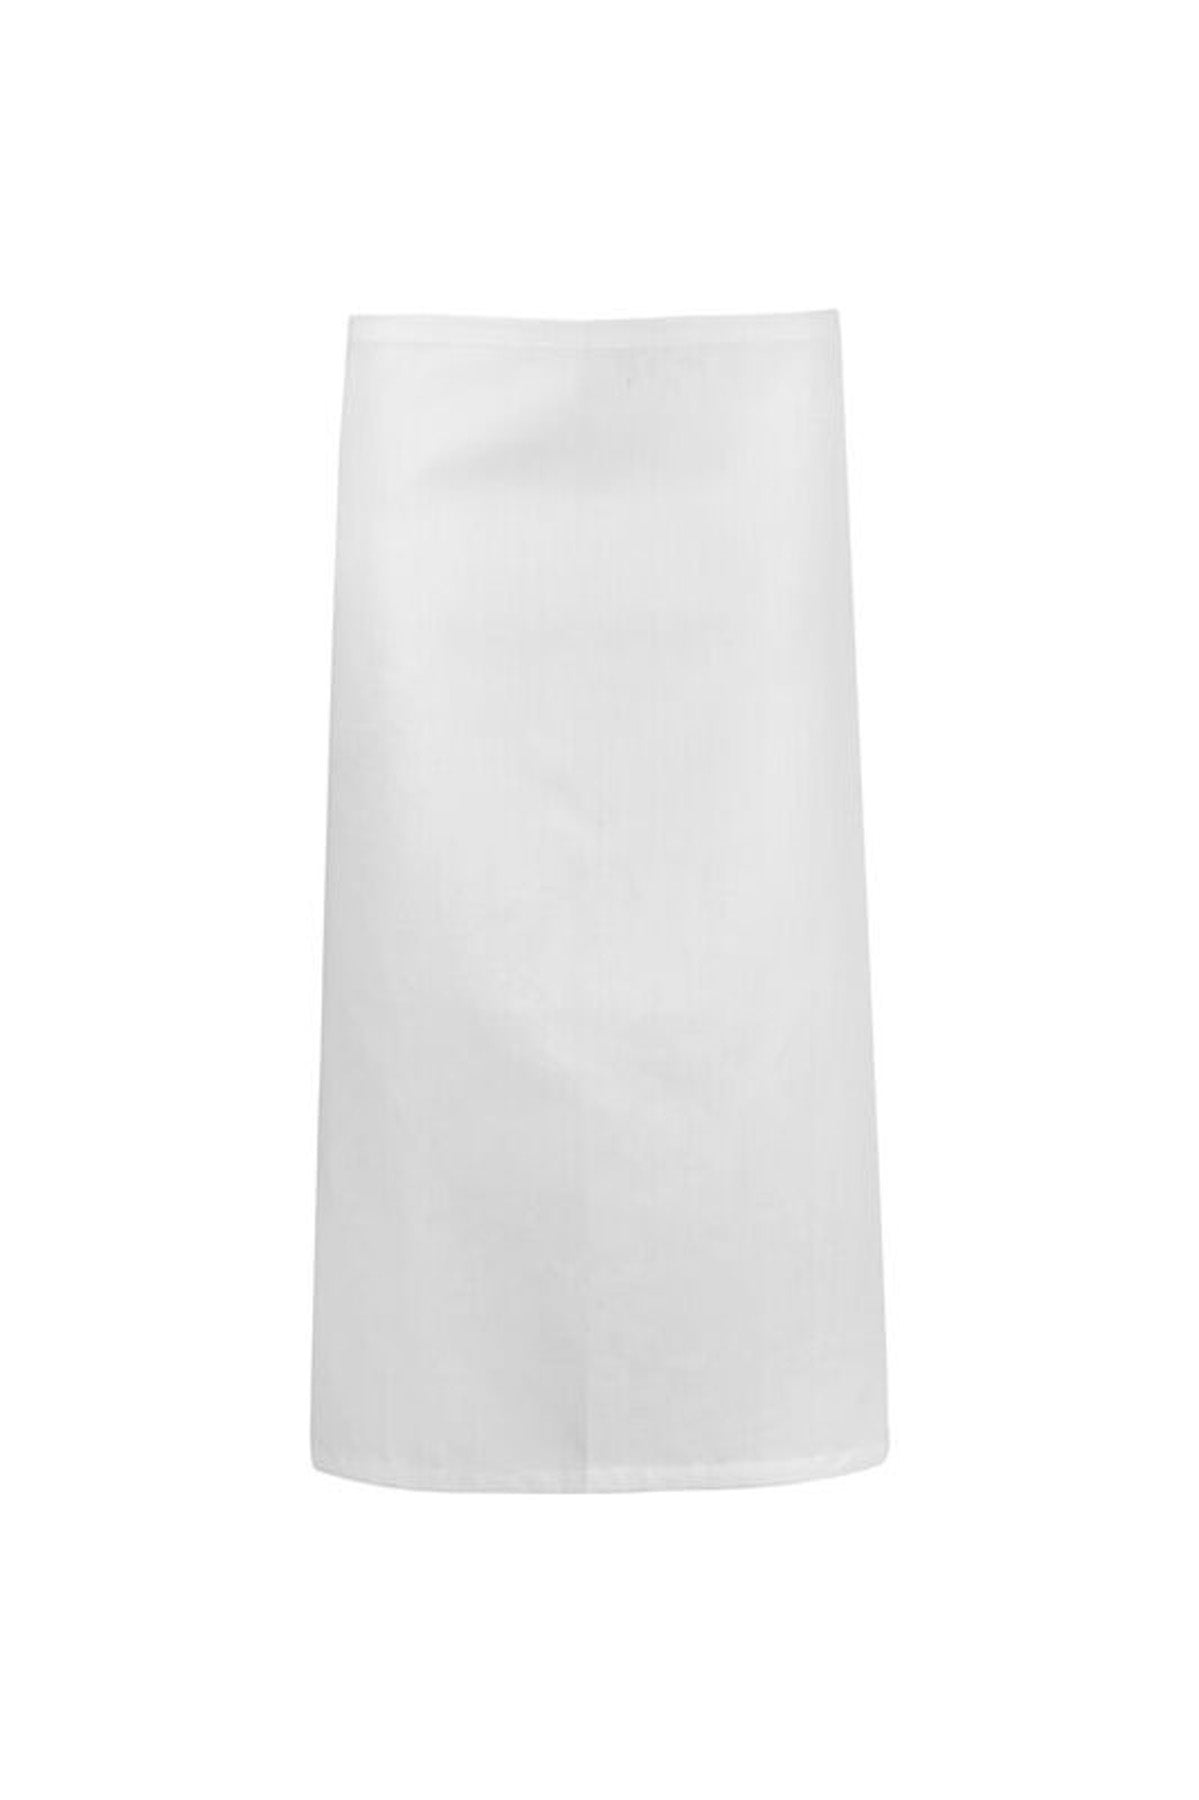 3/4 Length Apron - made by ChefsCraft